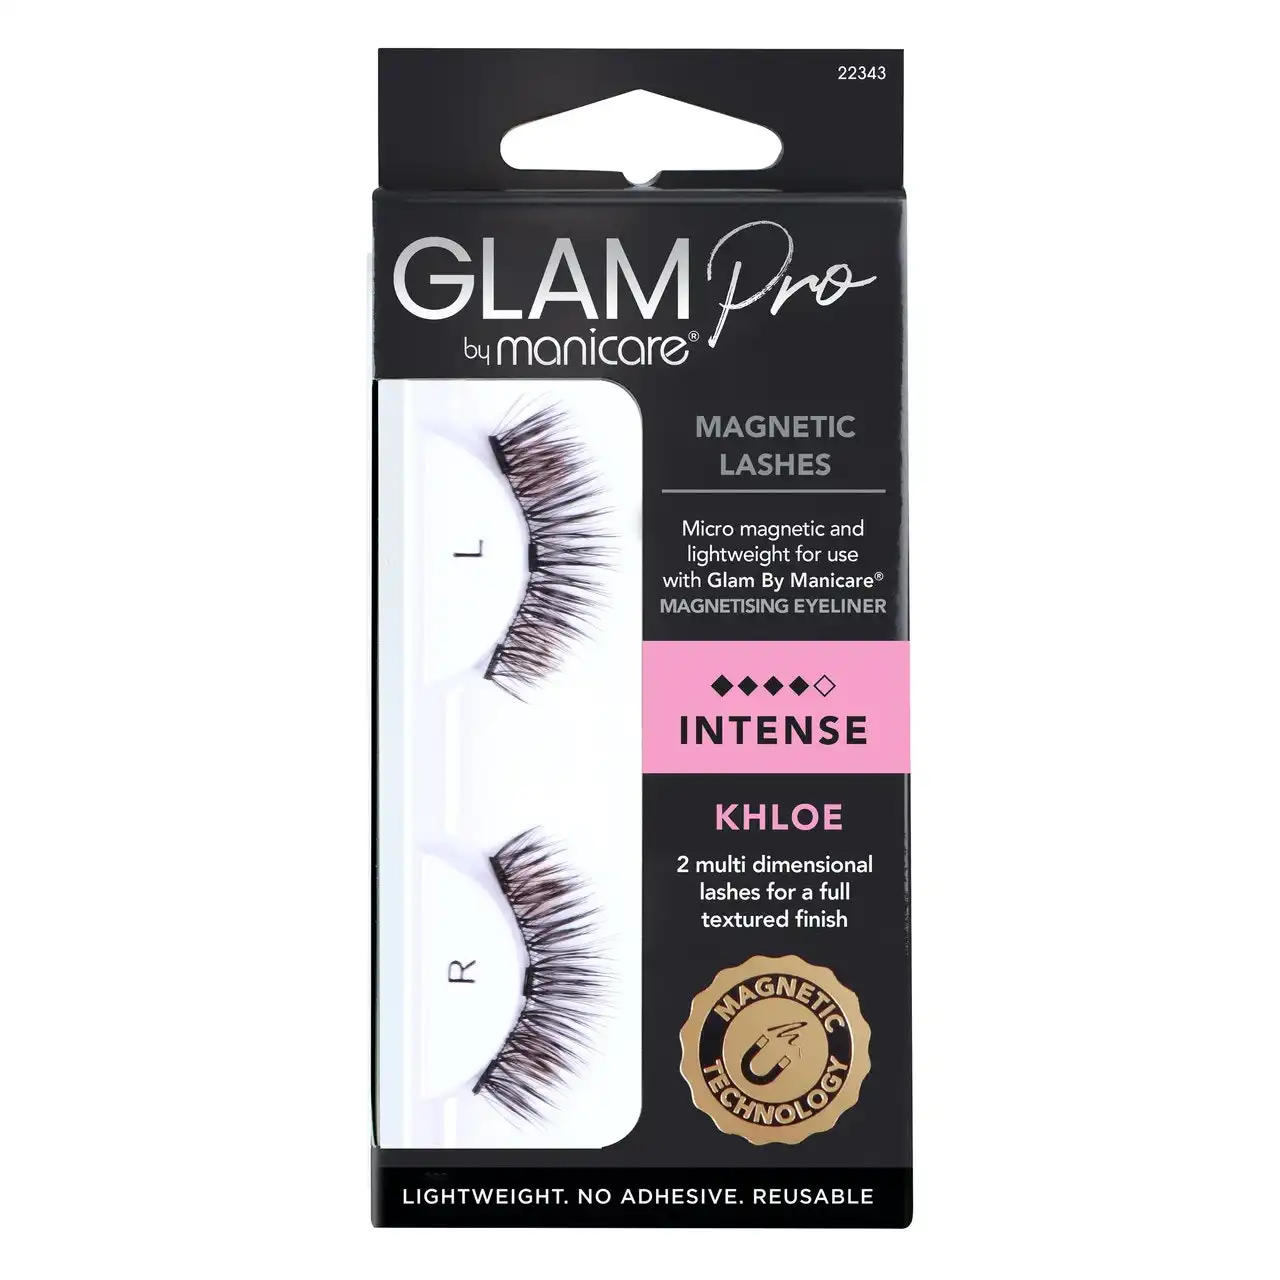 Glam by Manicare(R) Pro Khloe Magnetic Lashes